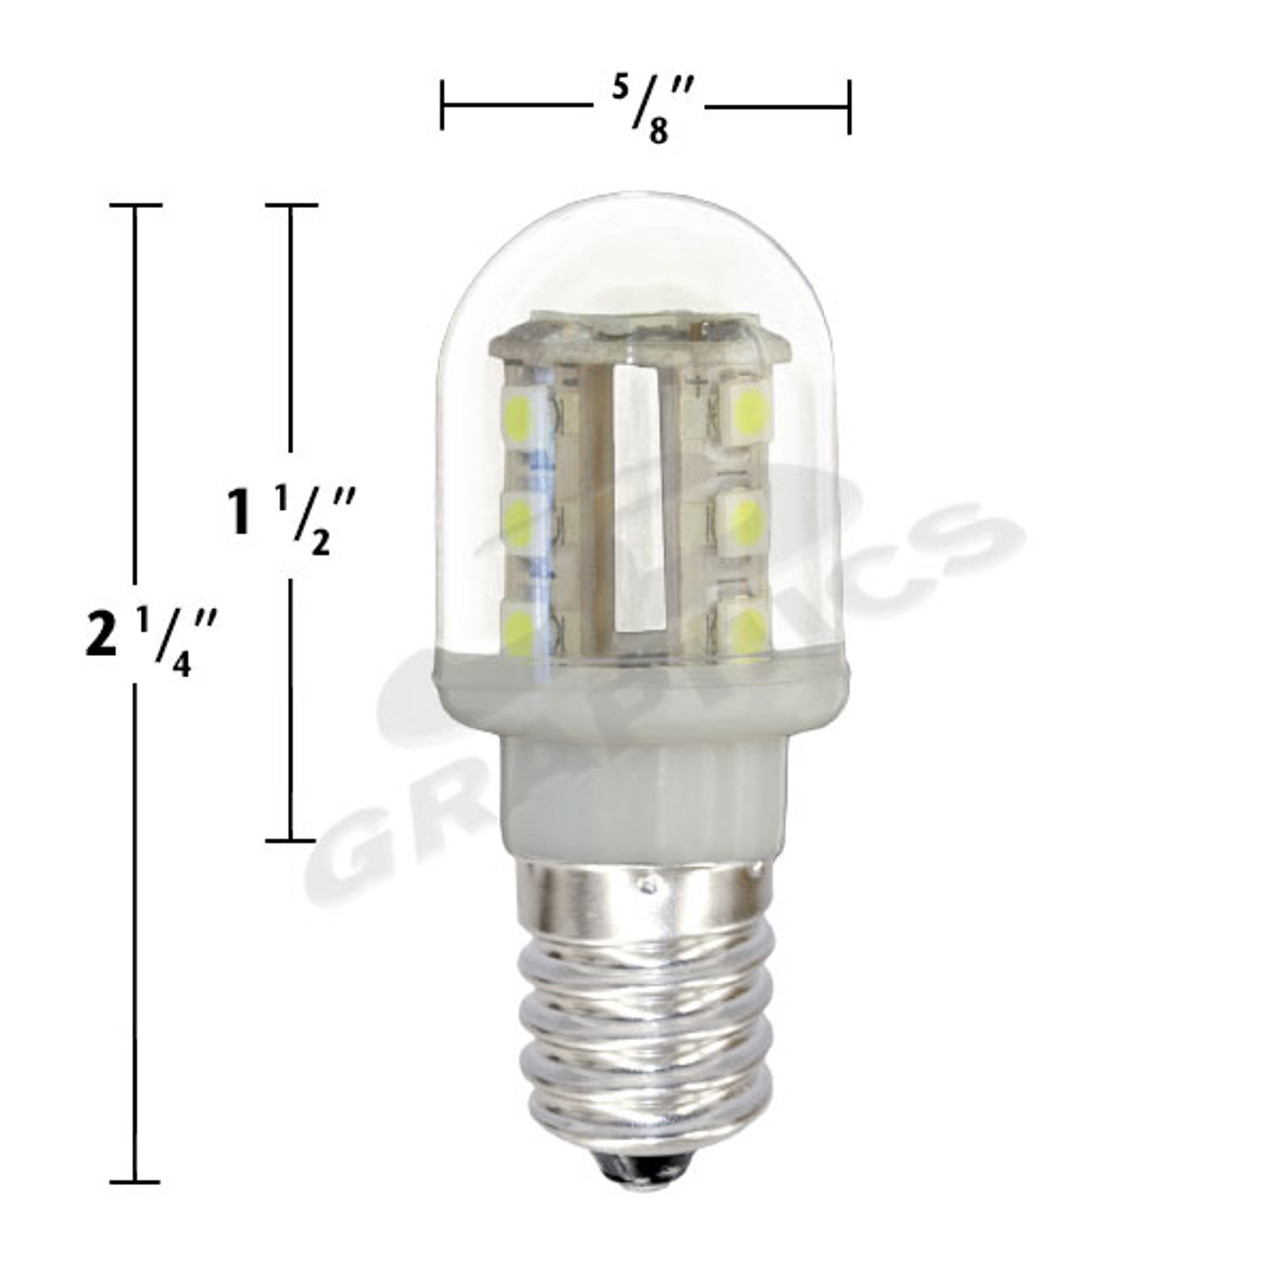 16 smd led t5 e14 turbo replacement midway brand pack 25 bulbs 227t5smd16 w action lighting inc